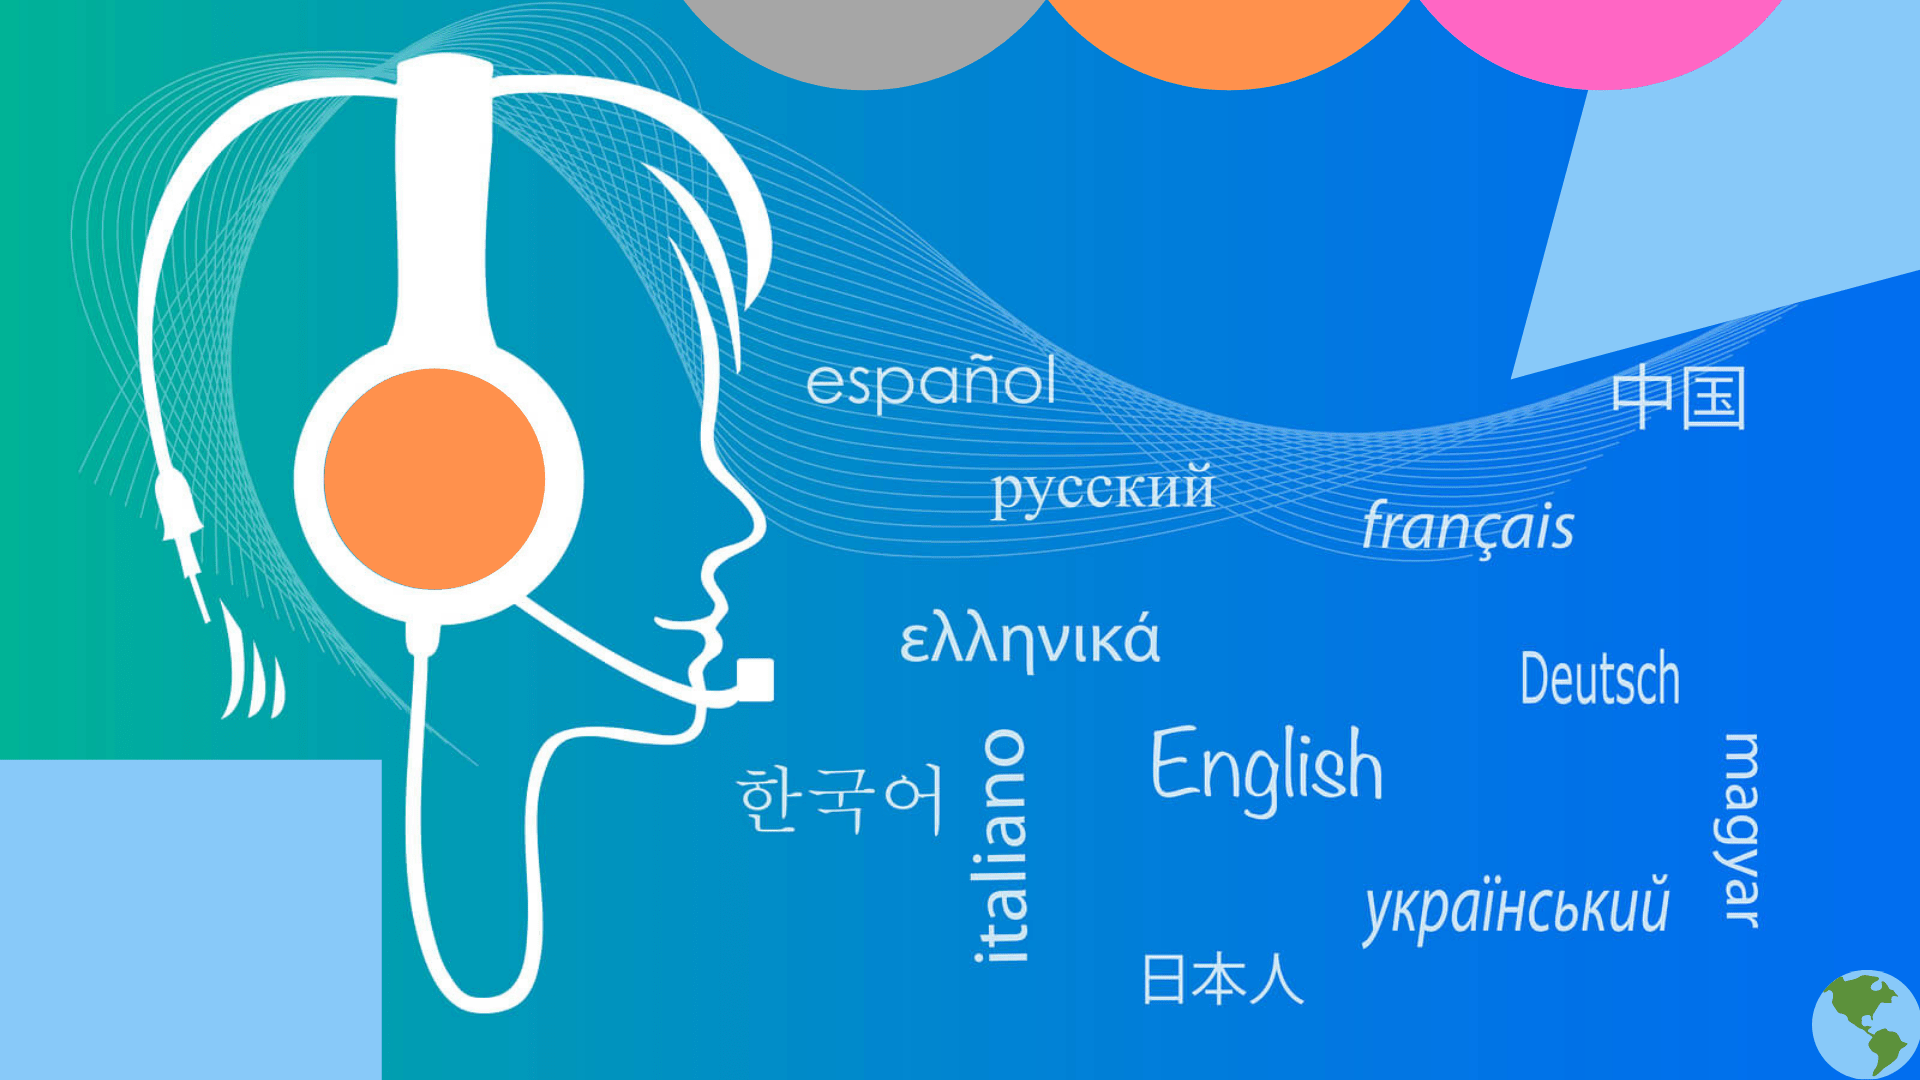 How to Deliver an Effective Multilingual Customer Service